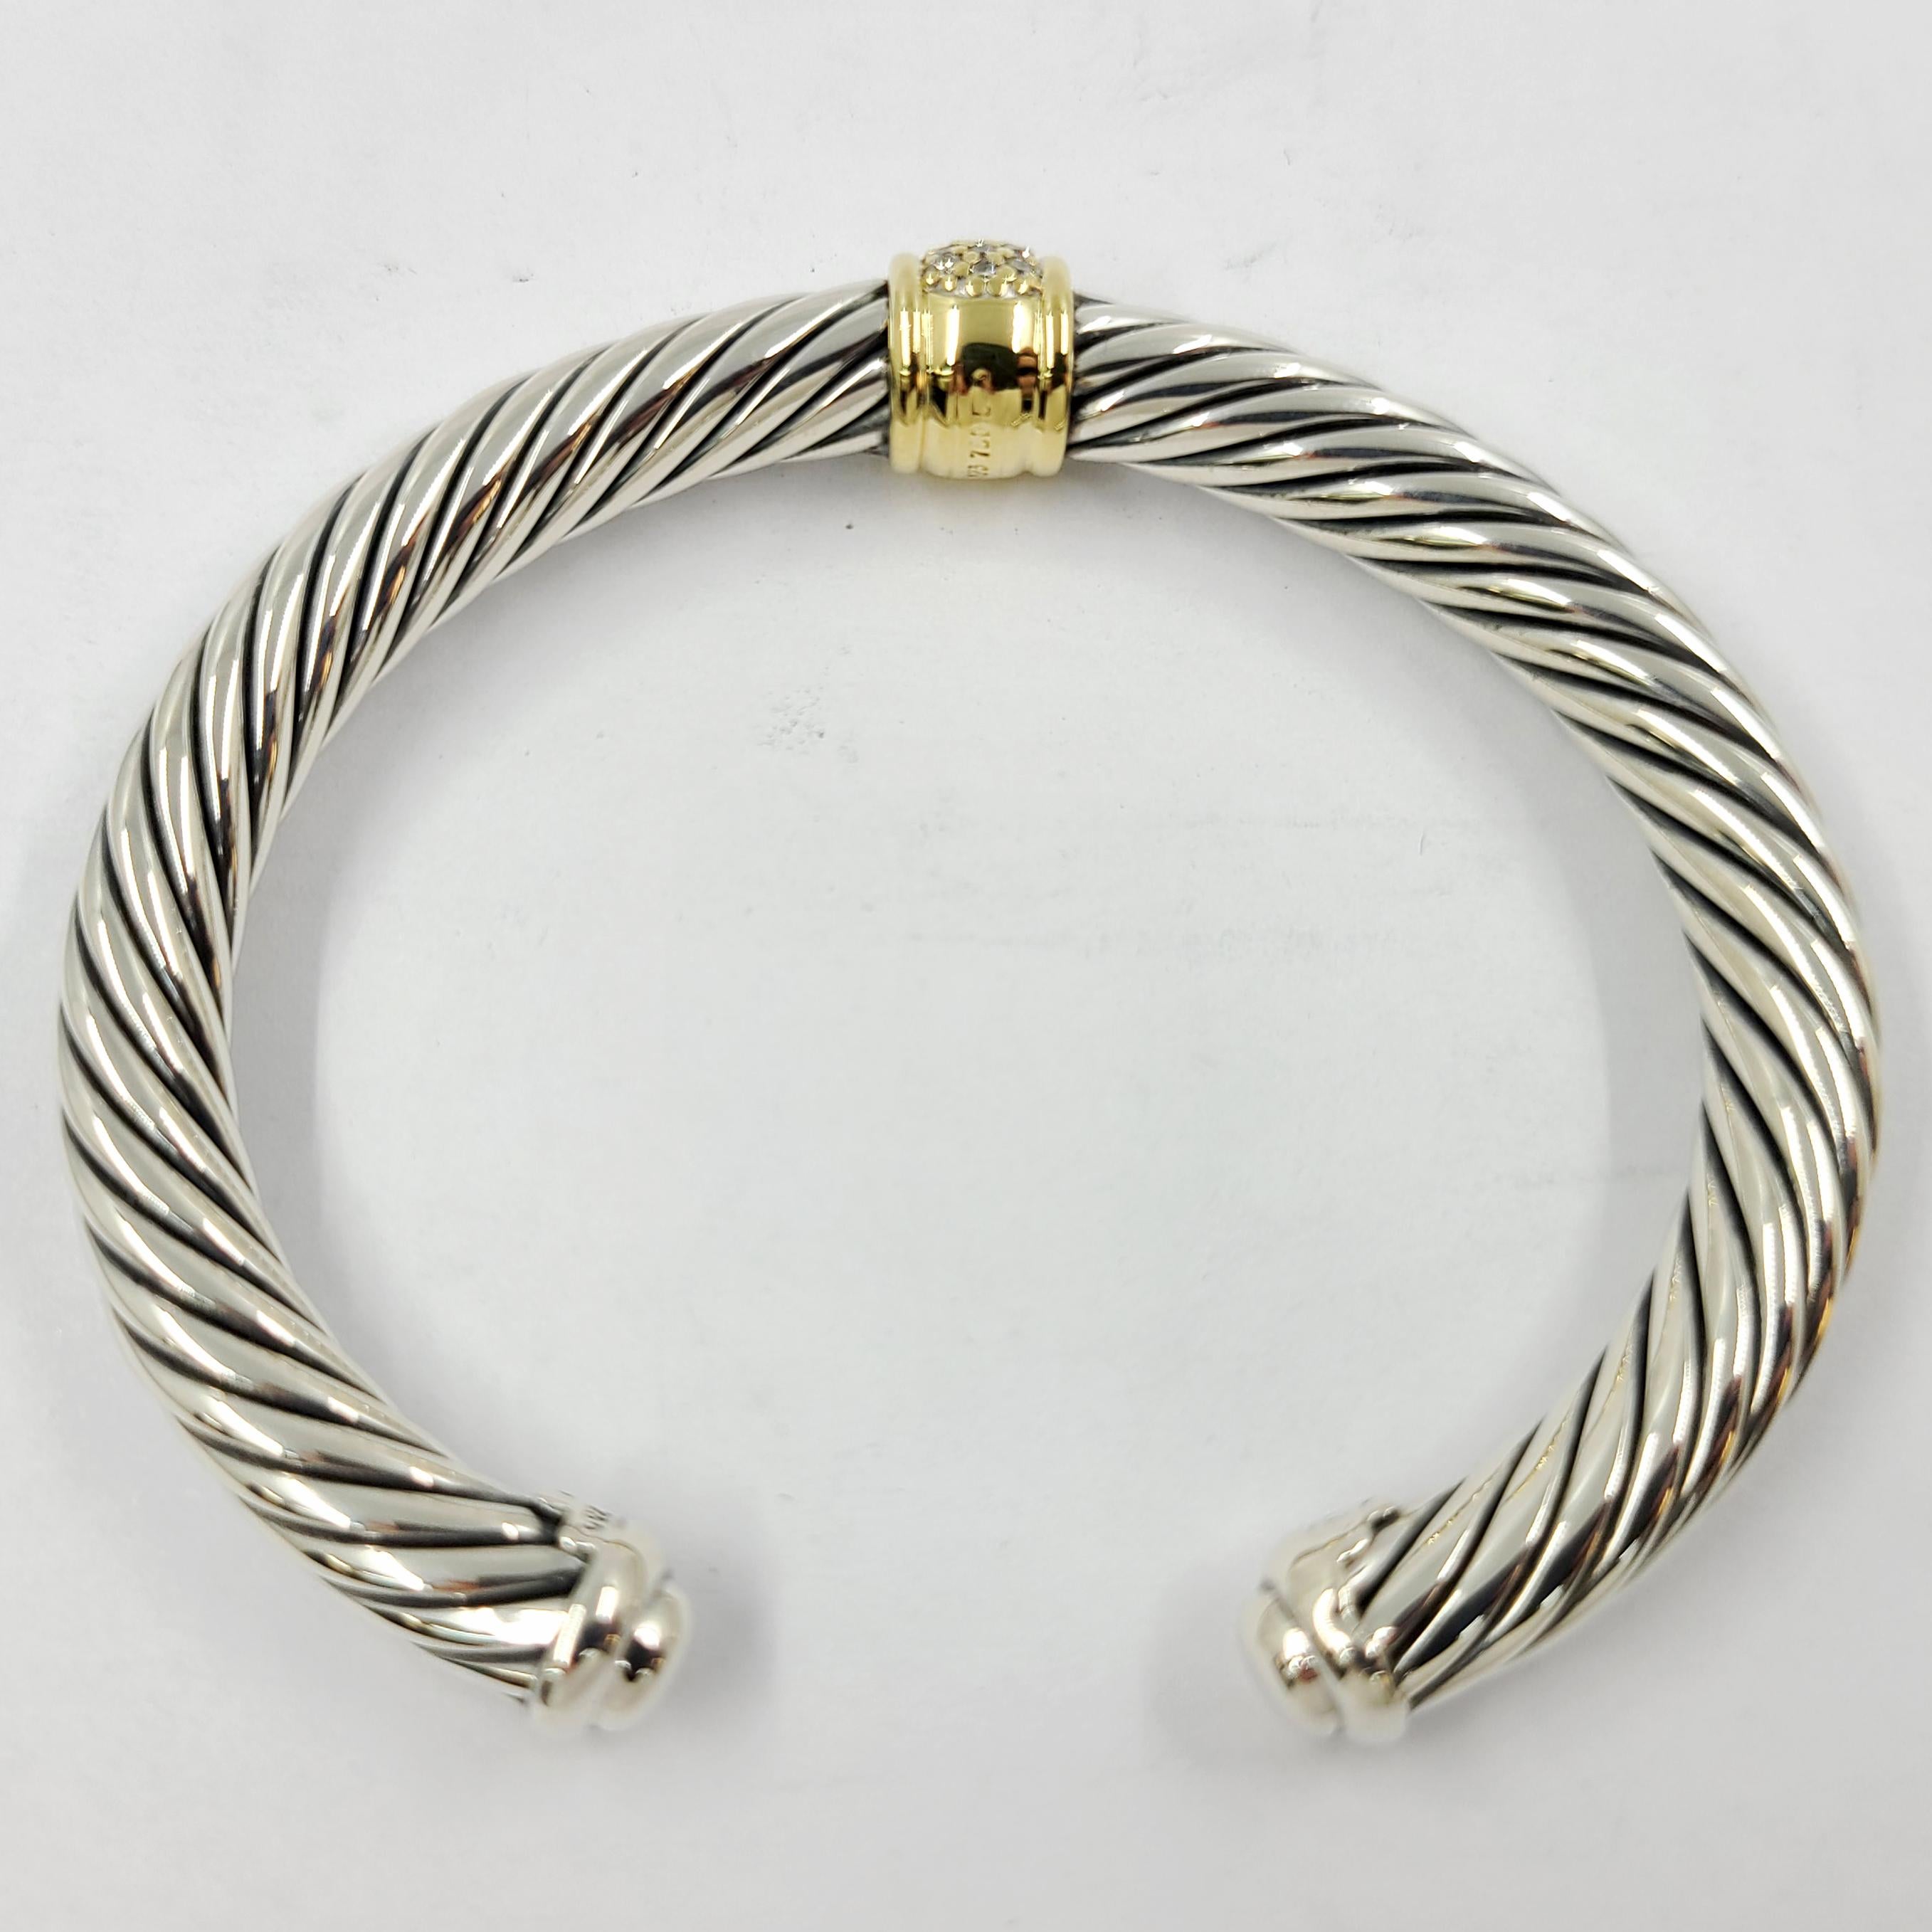 David Yurman Sterling Silver & 18 Karat Yellow Gold Wide Cable Cuff Bracelet Featuring 25 Round Diamonds Totaling Approximately 0.21 Carats. MSRP $1,700. Includes David Yurman Travel Pouch.